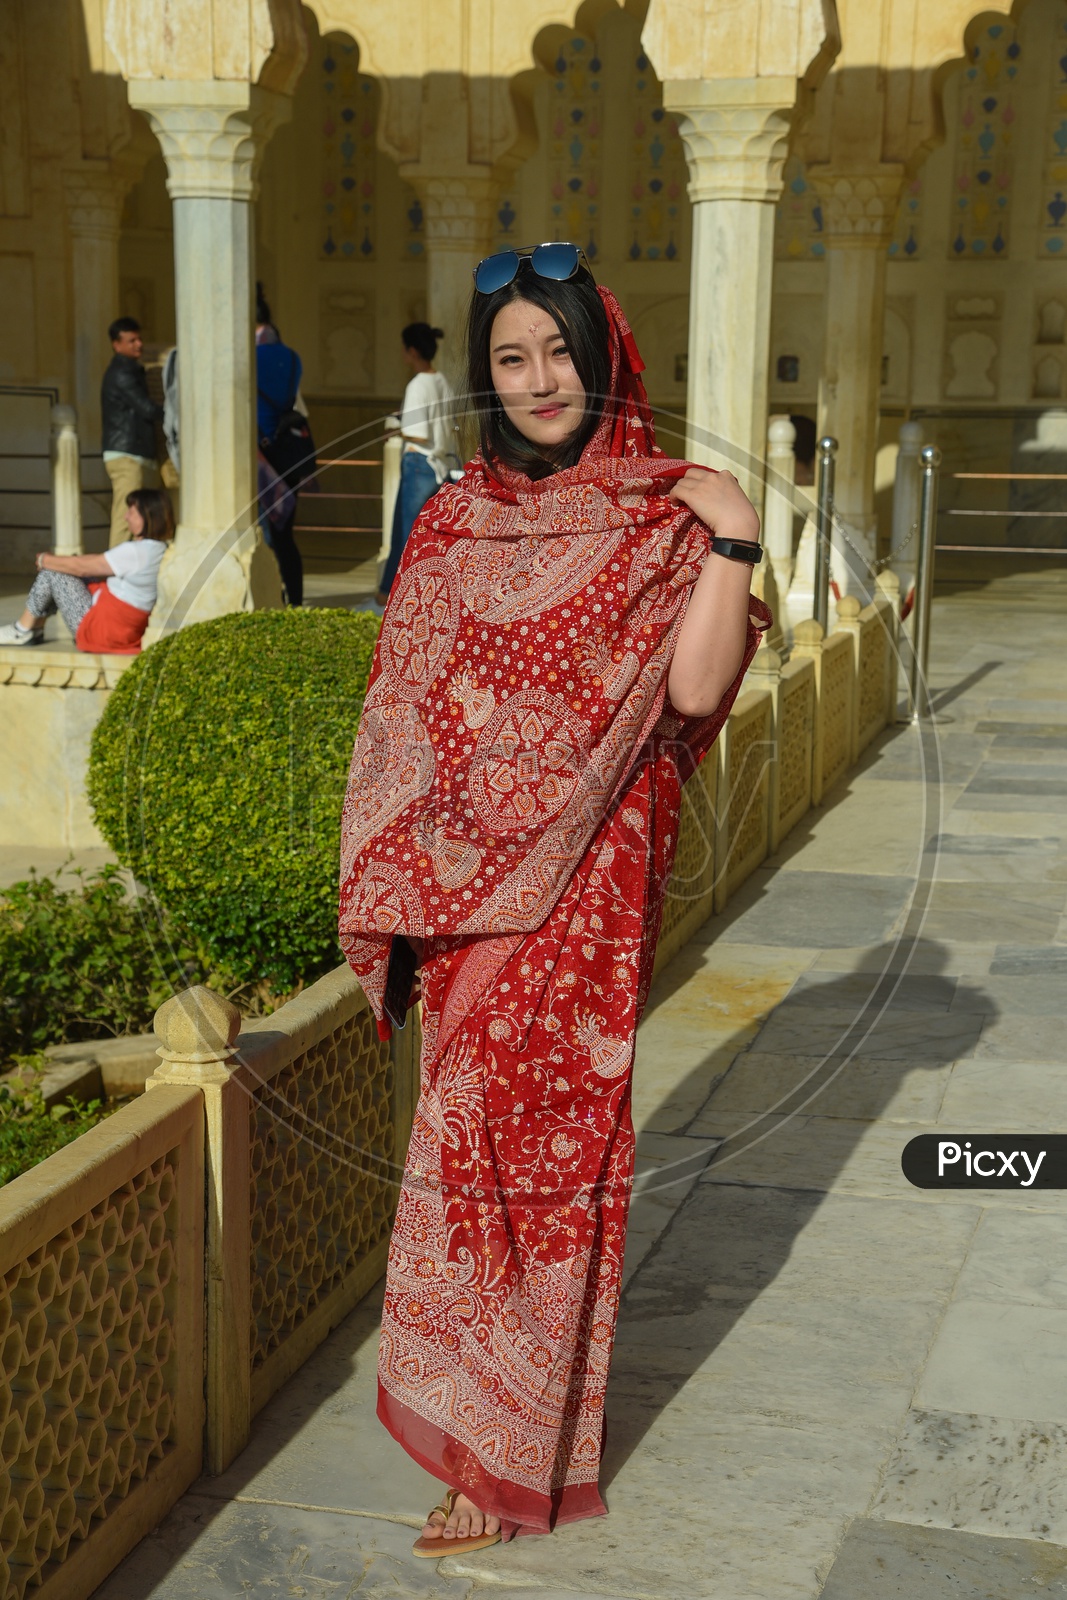 Japanese tourist dressed as Indian bride